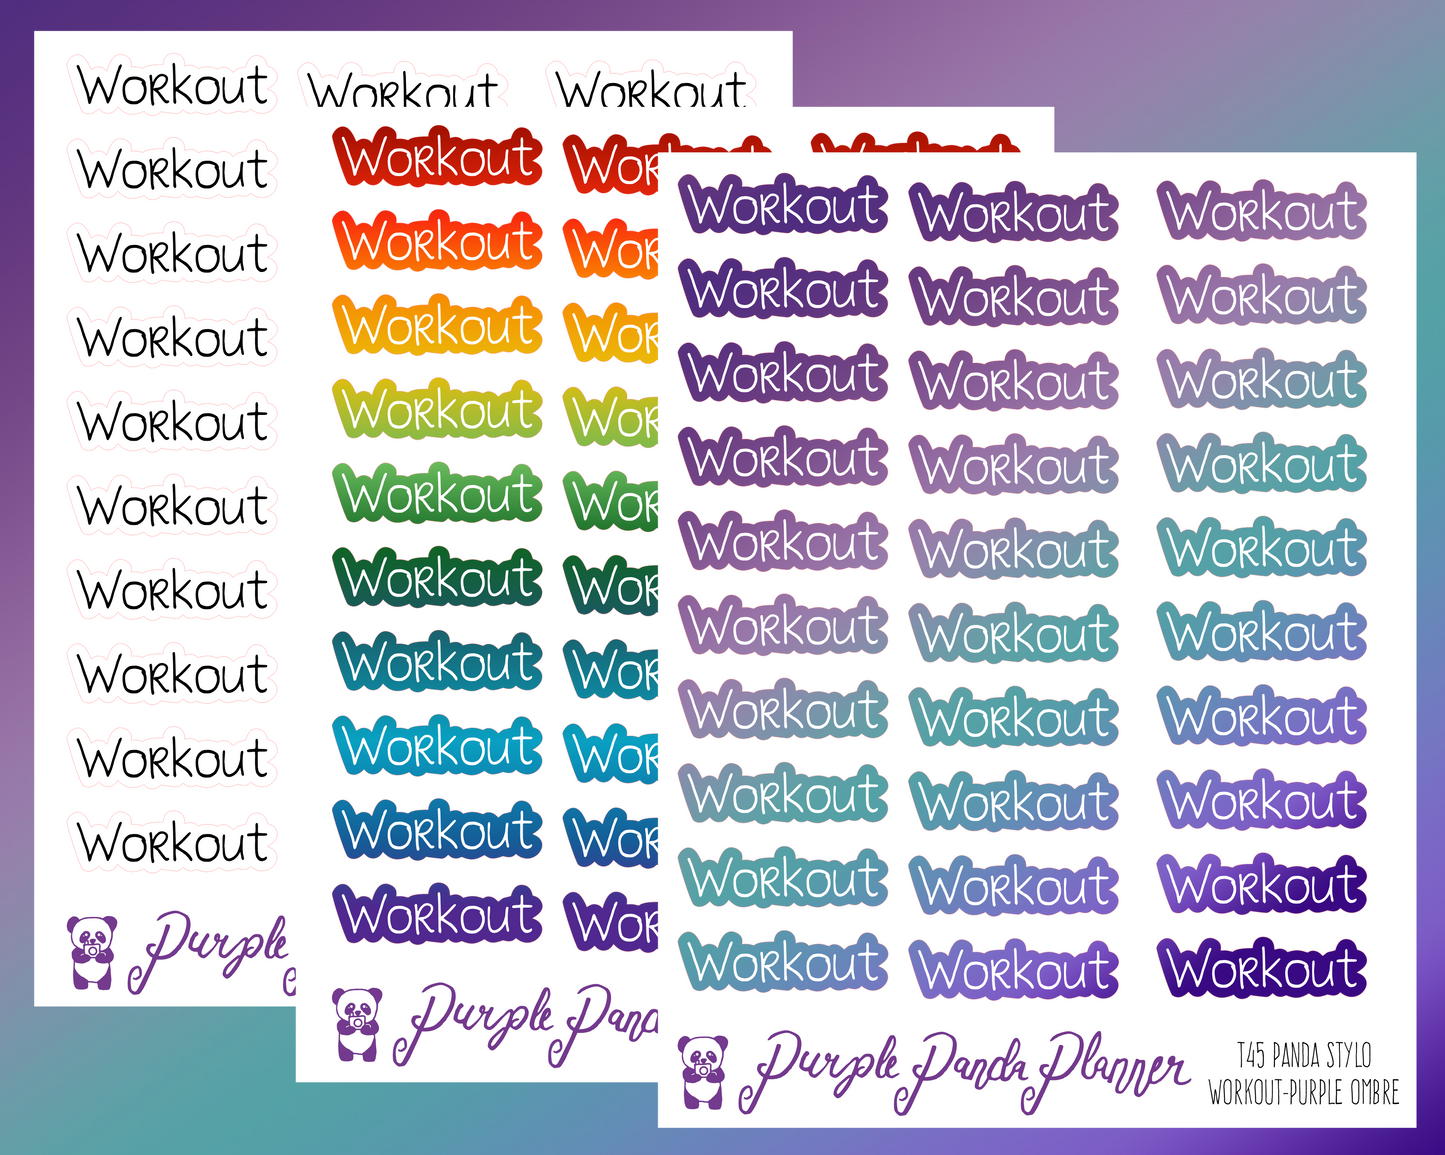 Workout (T45) - Panda Stylo Script - Black, Rainbow, or Purple Ombre - Stickers for Planner, Journal or Calendar